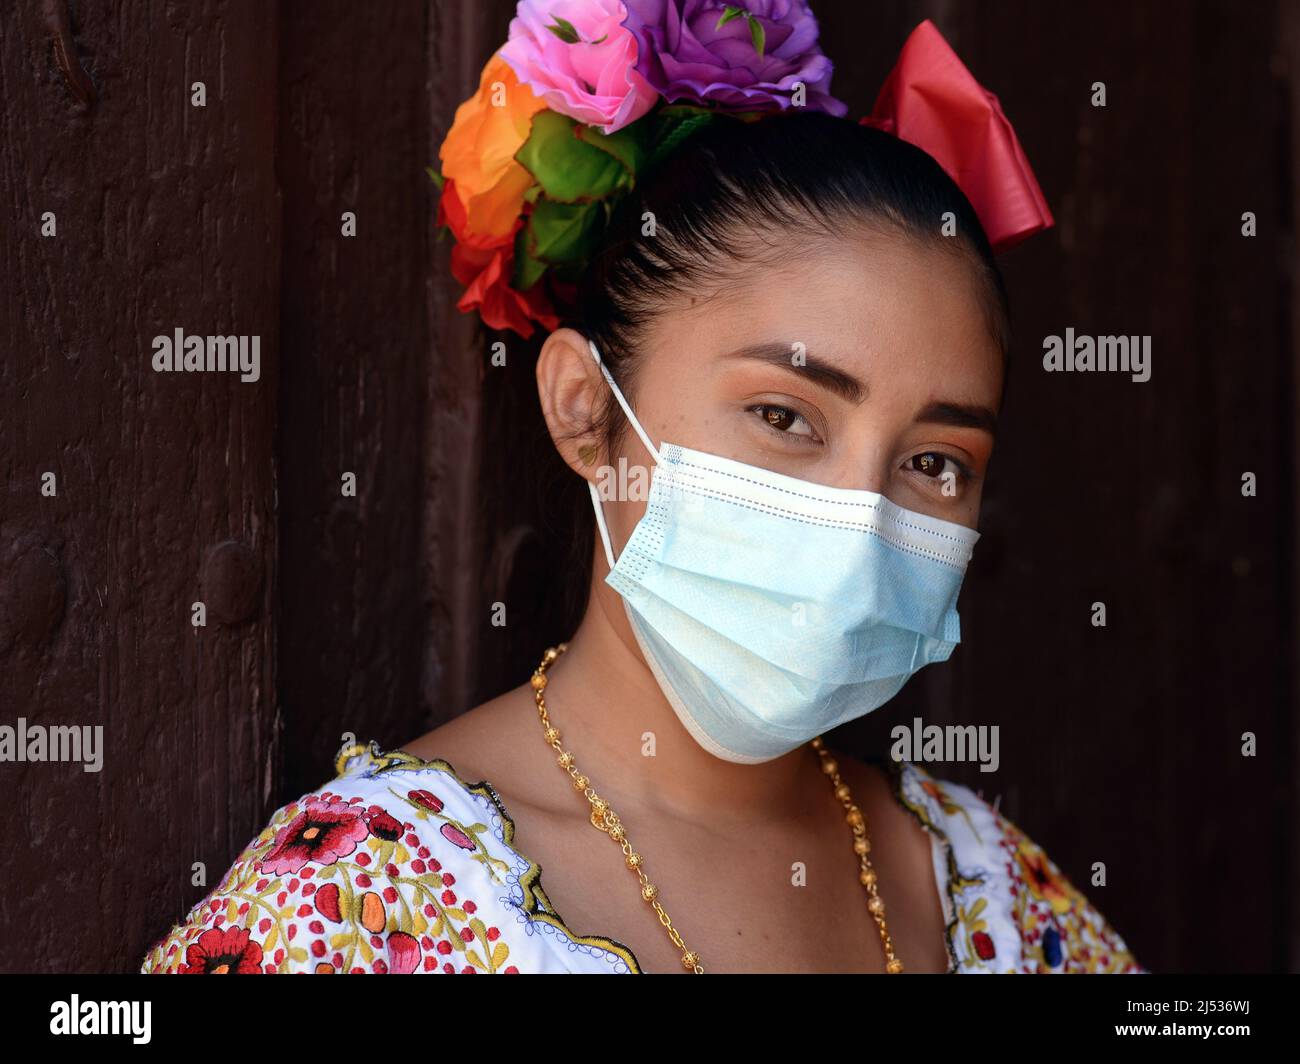 Attractive young Mexican woman with flowers in slicked-back hair wears a colorful traditional Yucatan Maya huipil dress and surgical face mask. Stock Photo